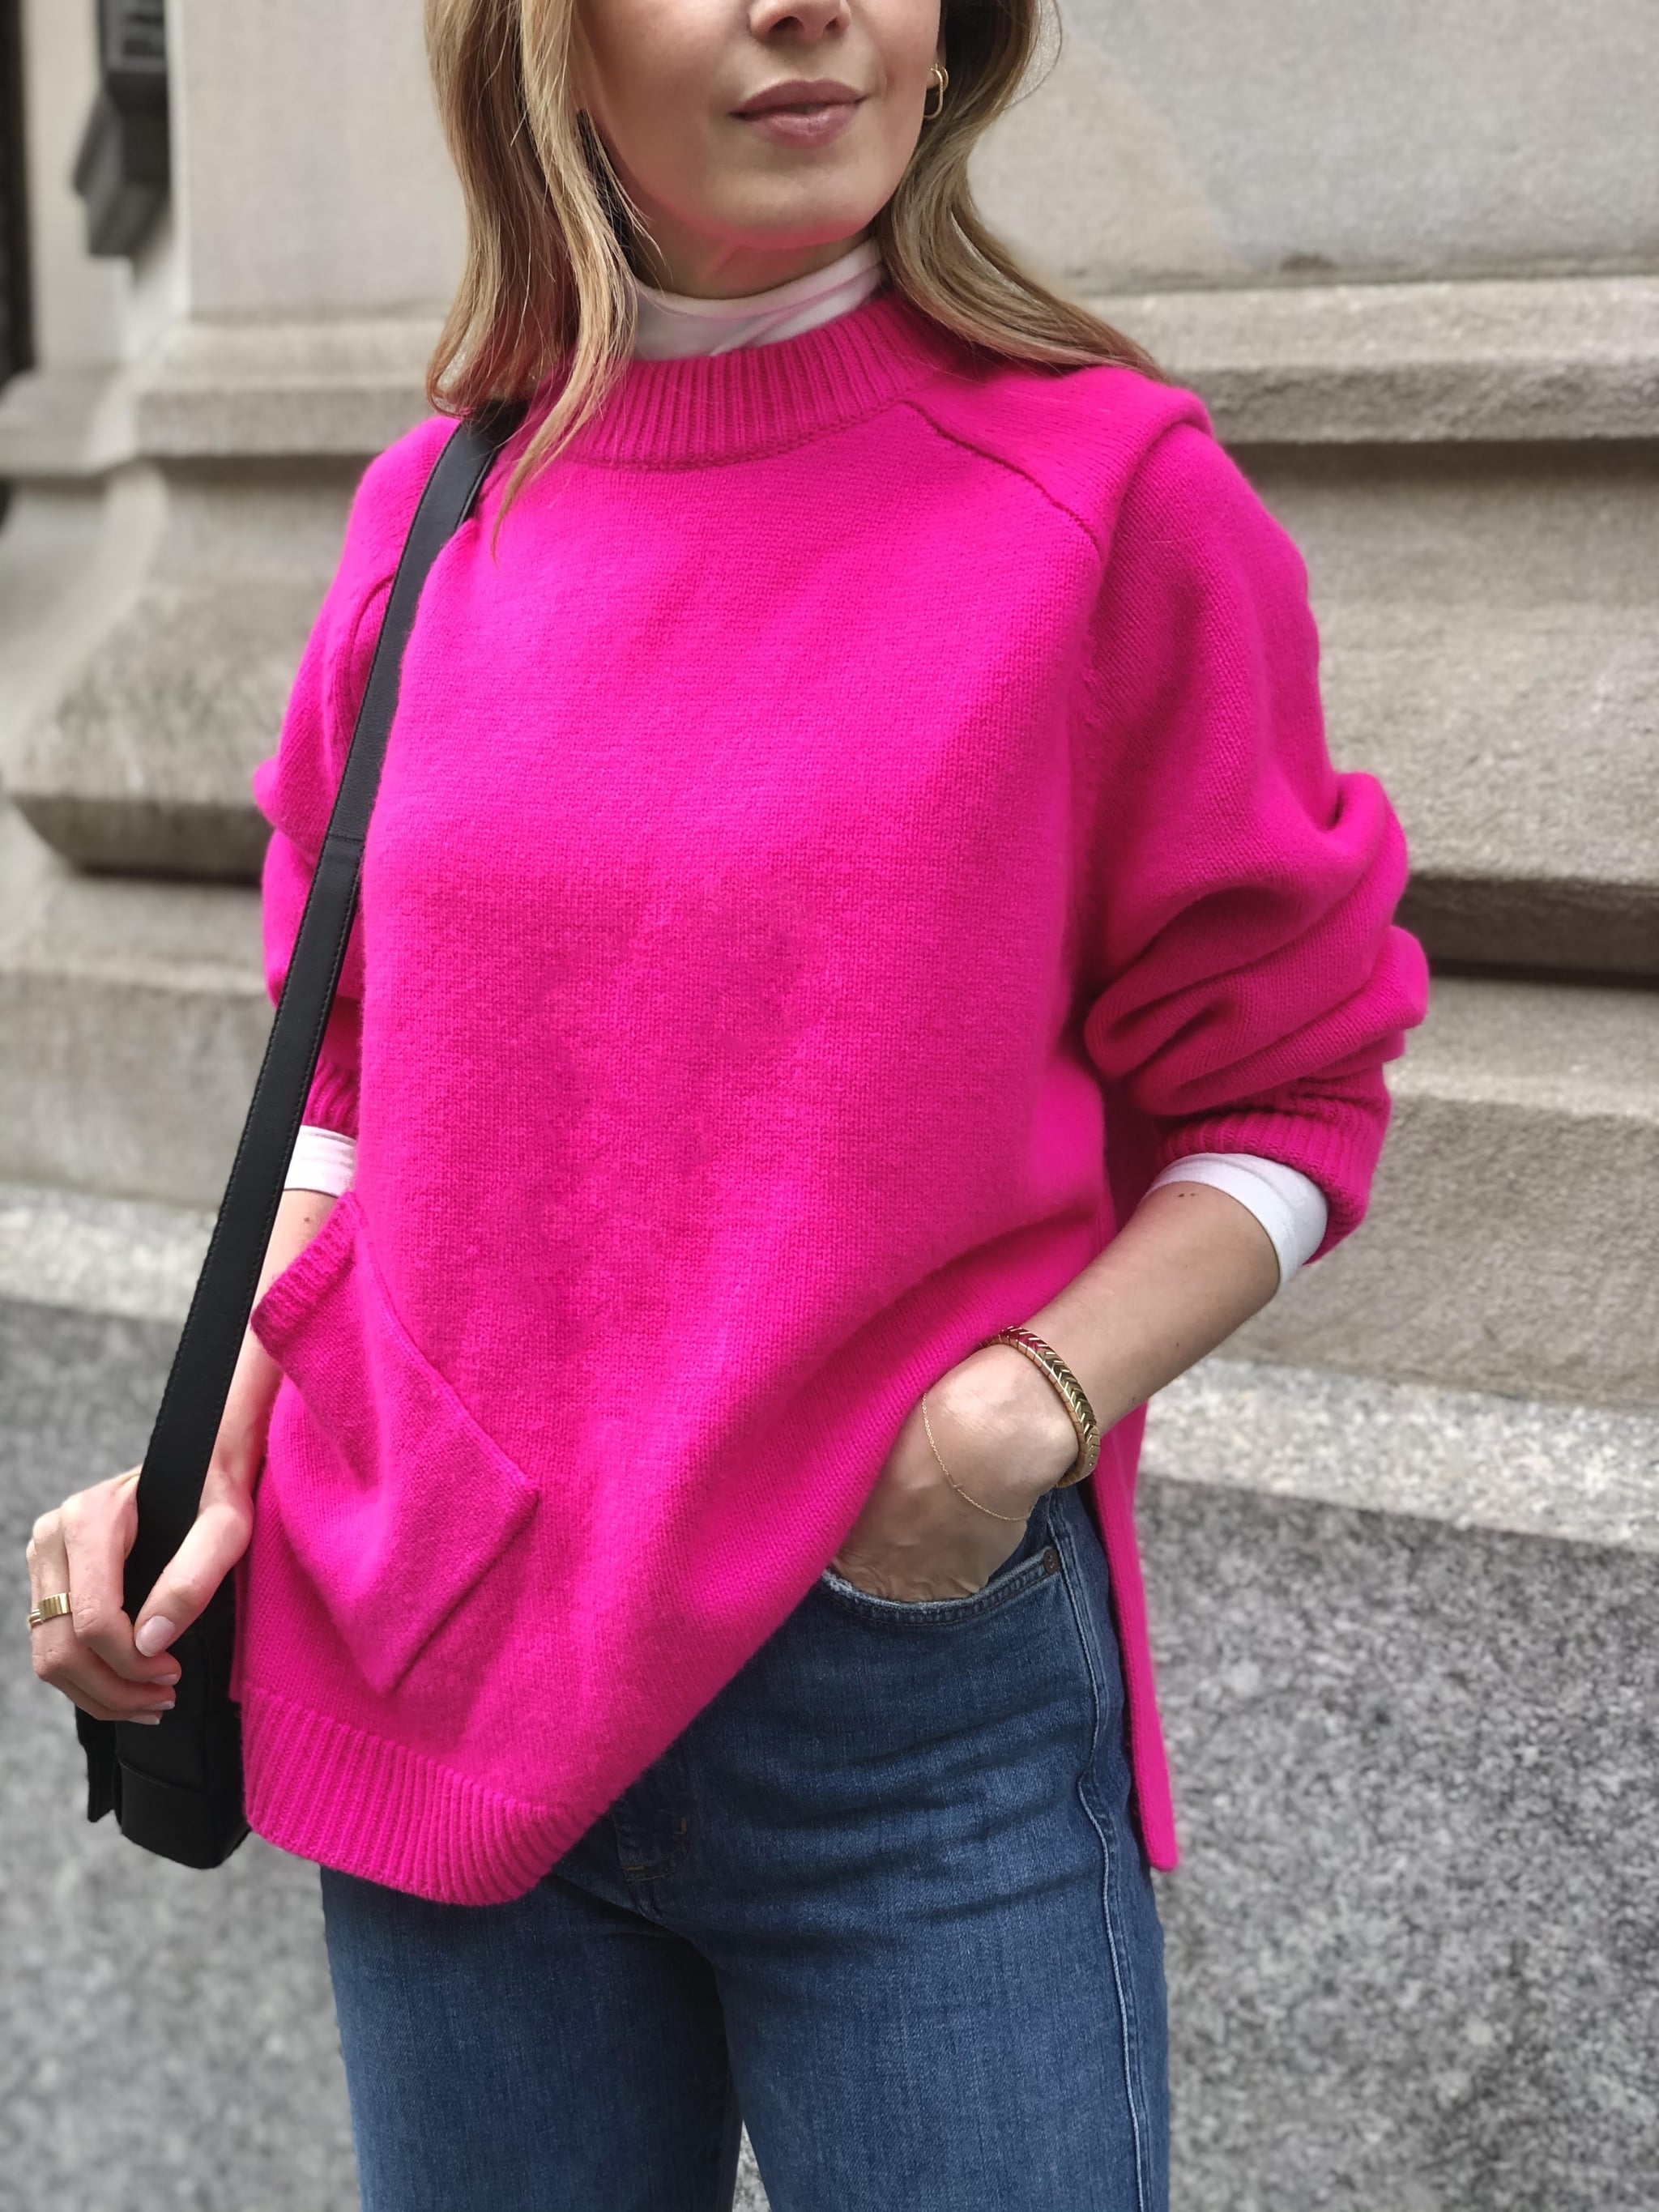 How to Layer a Turtleneck in the Winter | POPSUGAR Fashion Middle East